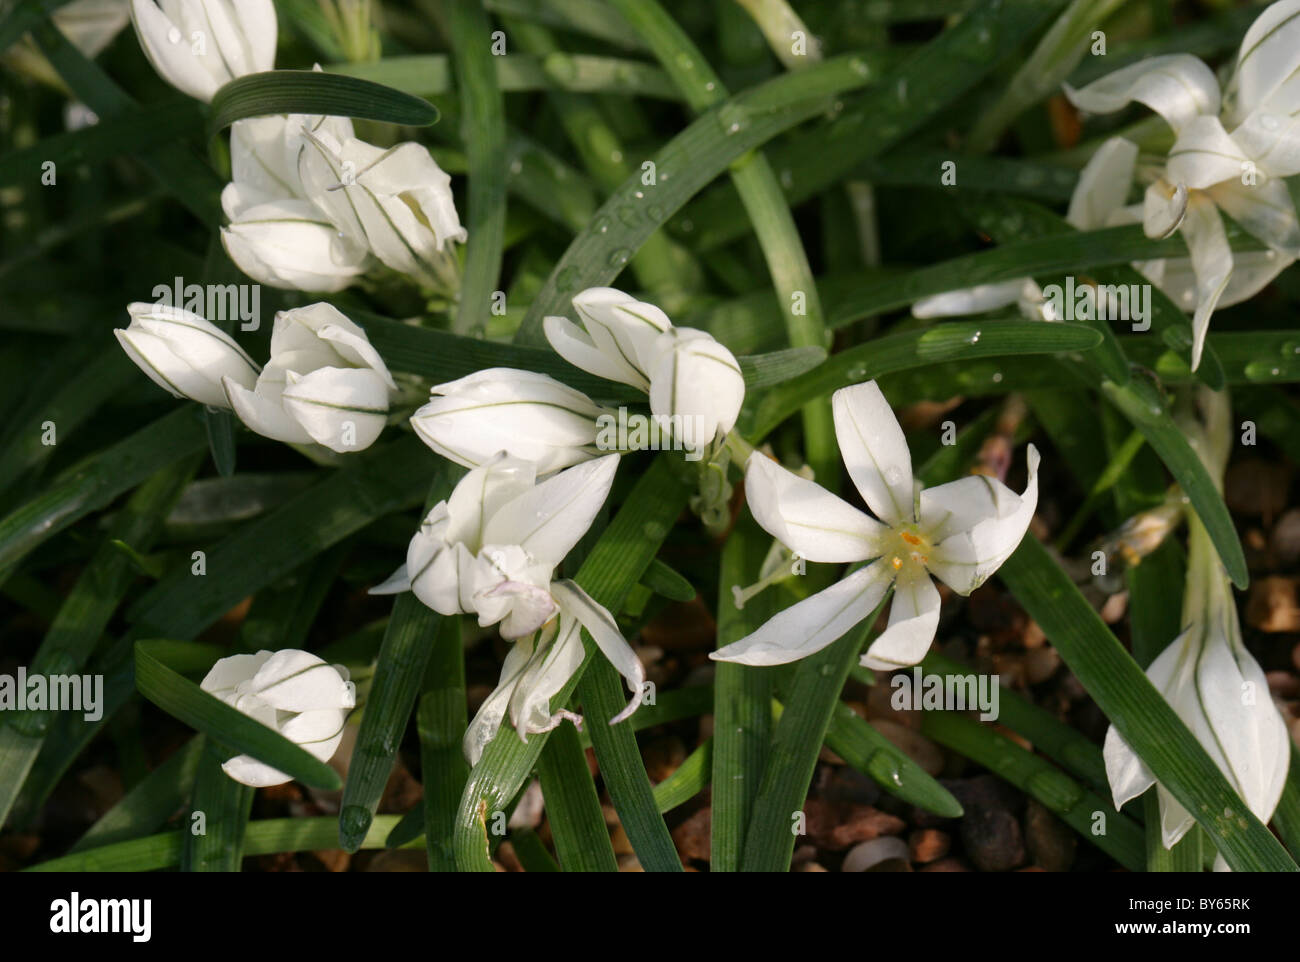 Starflower, Ipheion sessile, Liliaceae, Chile and Uruguay, South America. Syn. Tristagma sessile. Stock Photo